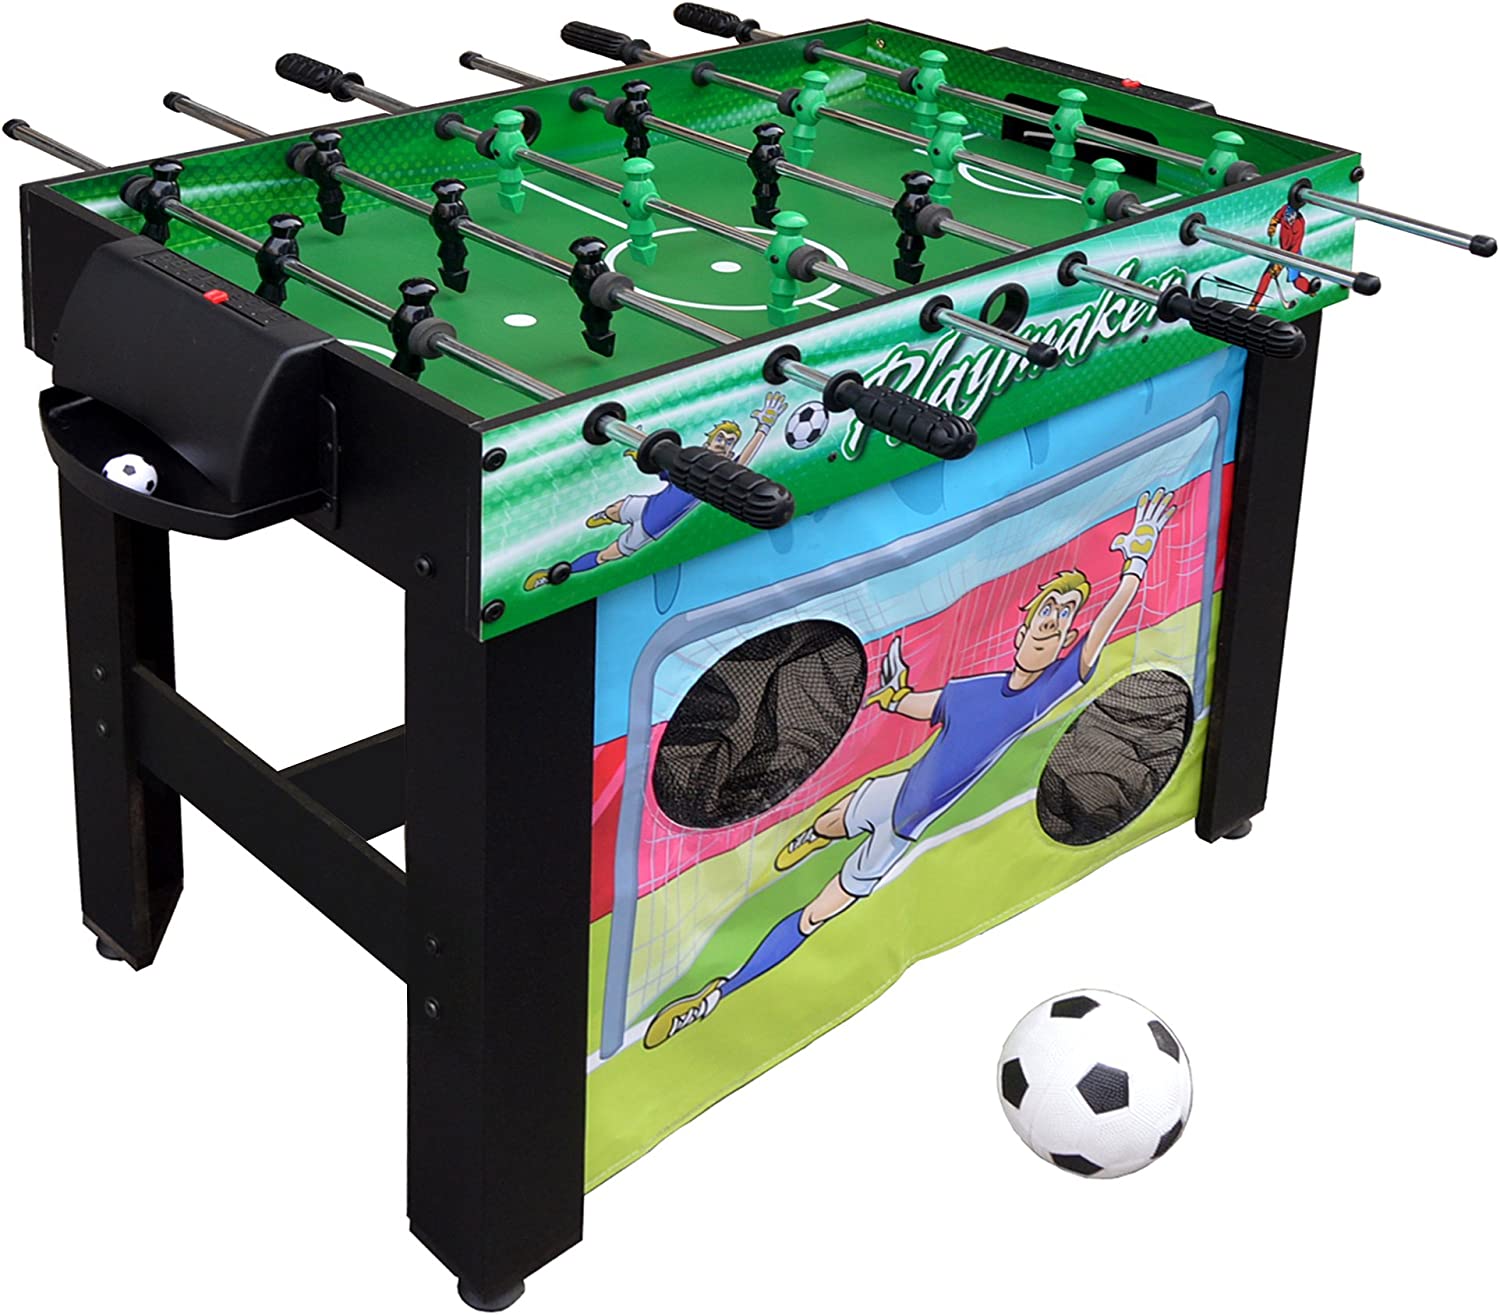 Hathaway Playmaker 3-in-1 Foosball Multi-Game Table with Soccer and Hockey Target Nets for Kids